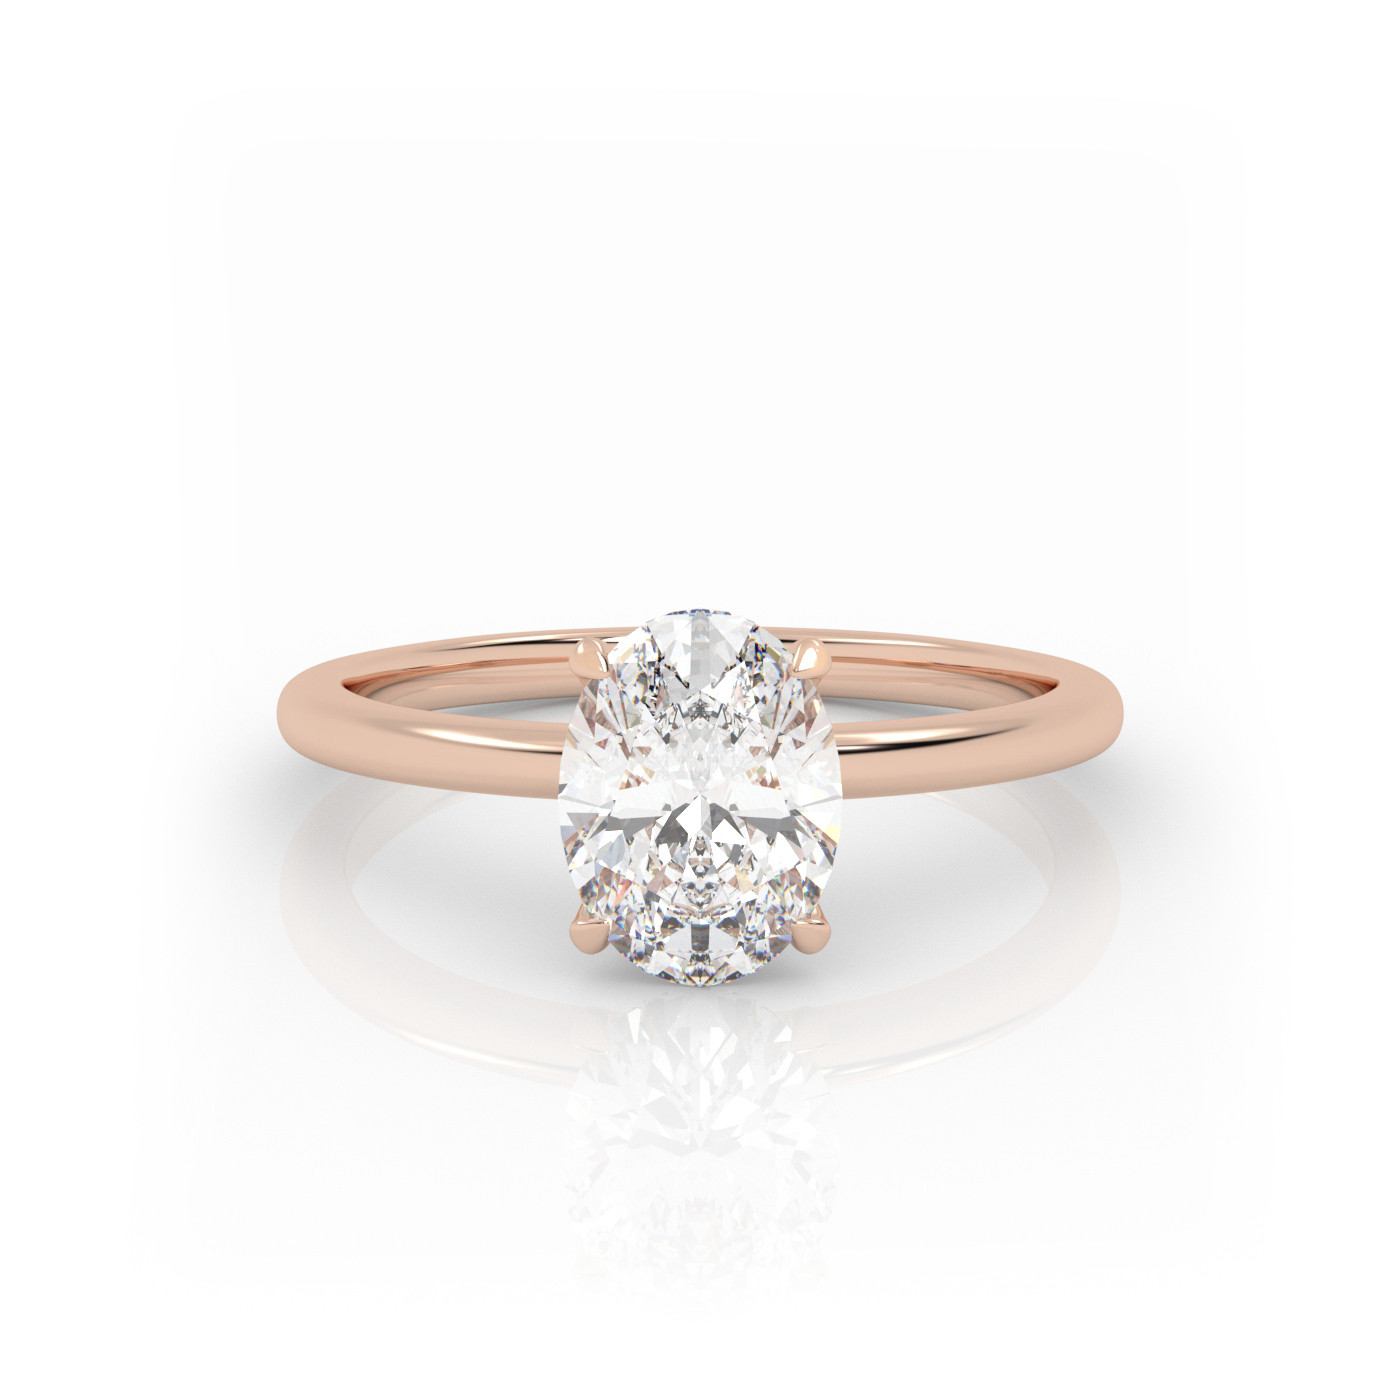 18K ROSE GOLD Oval Diamond Solitaire Engagement Ring